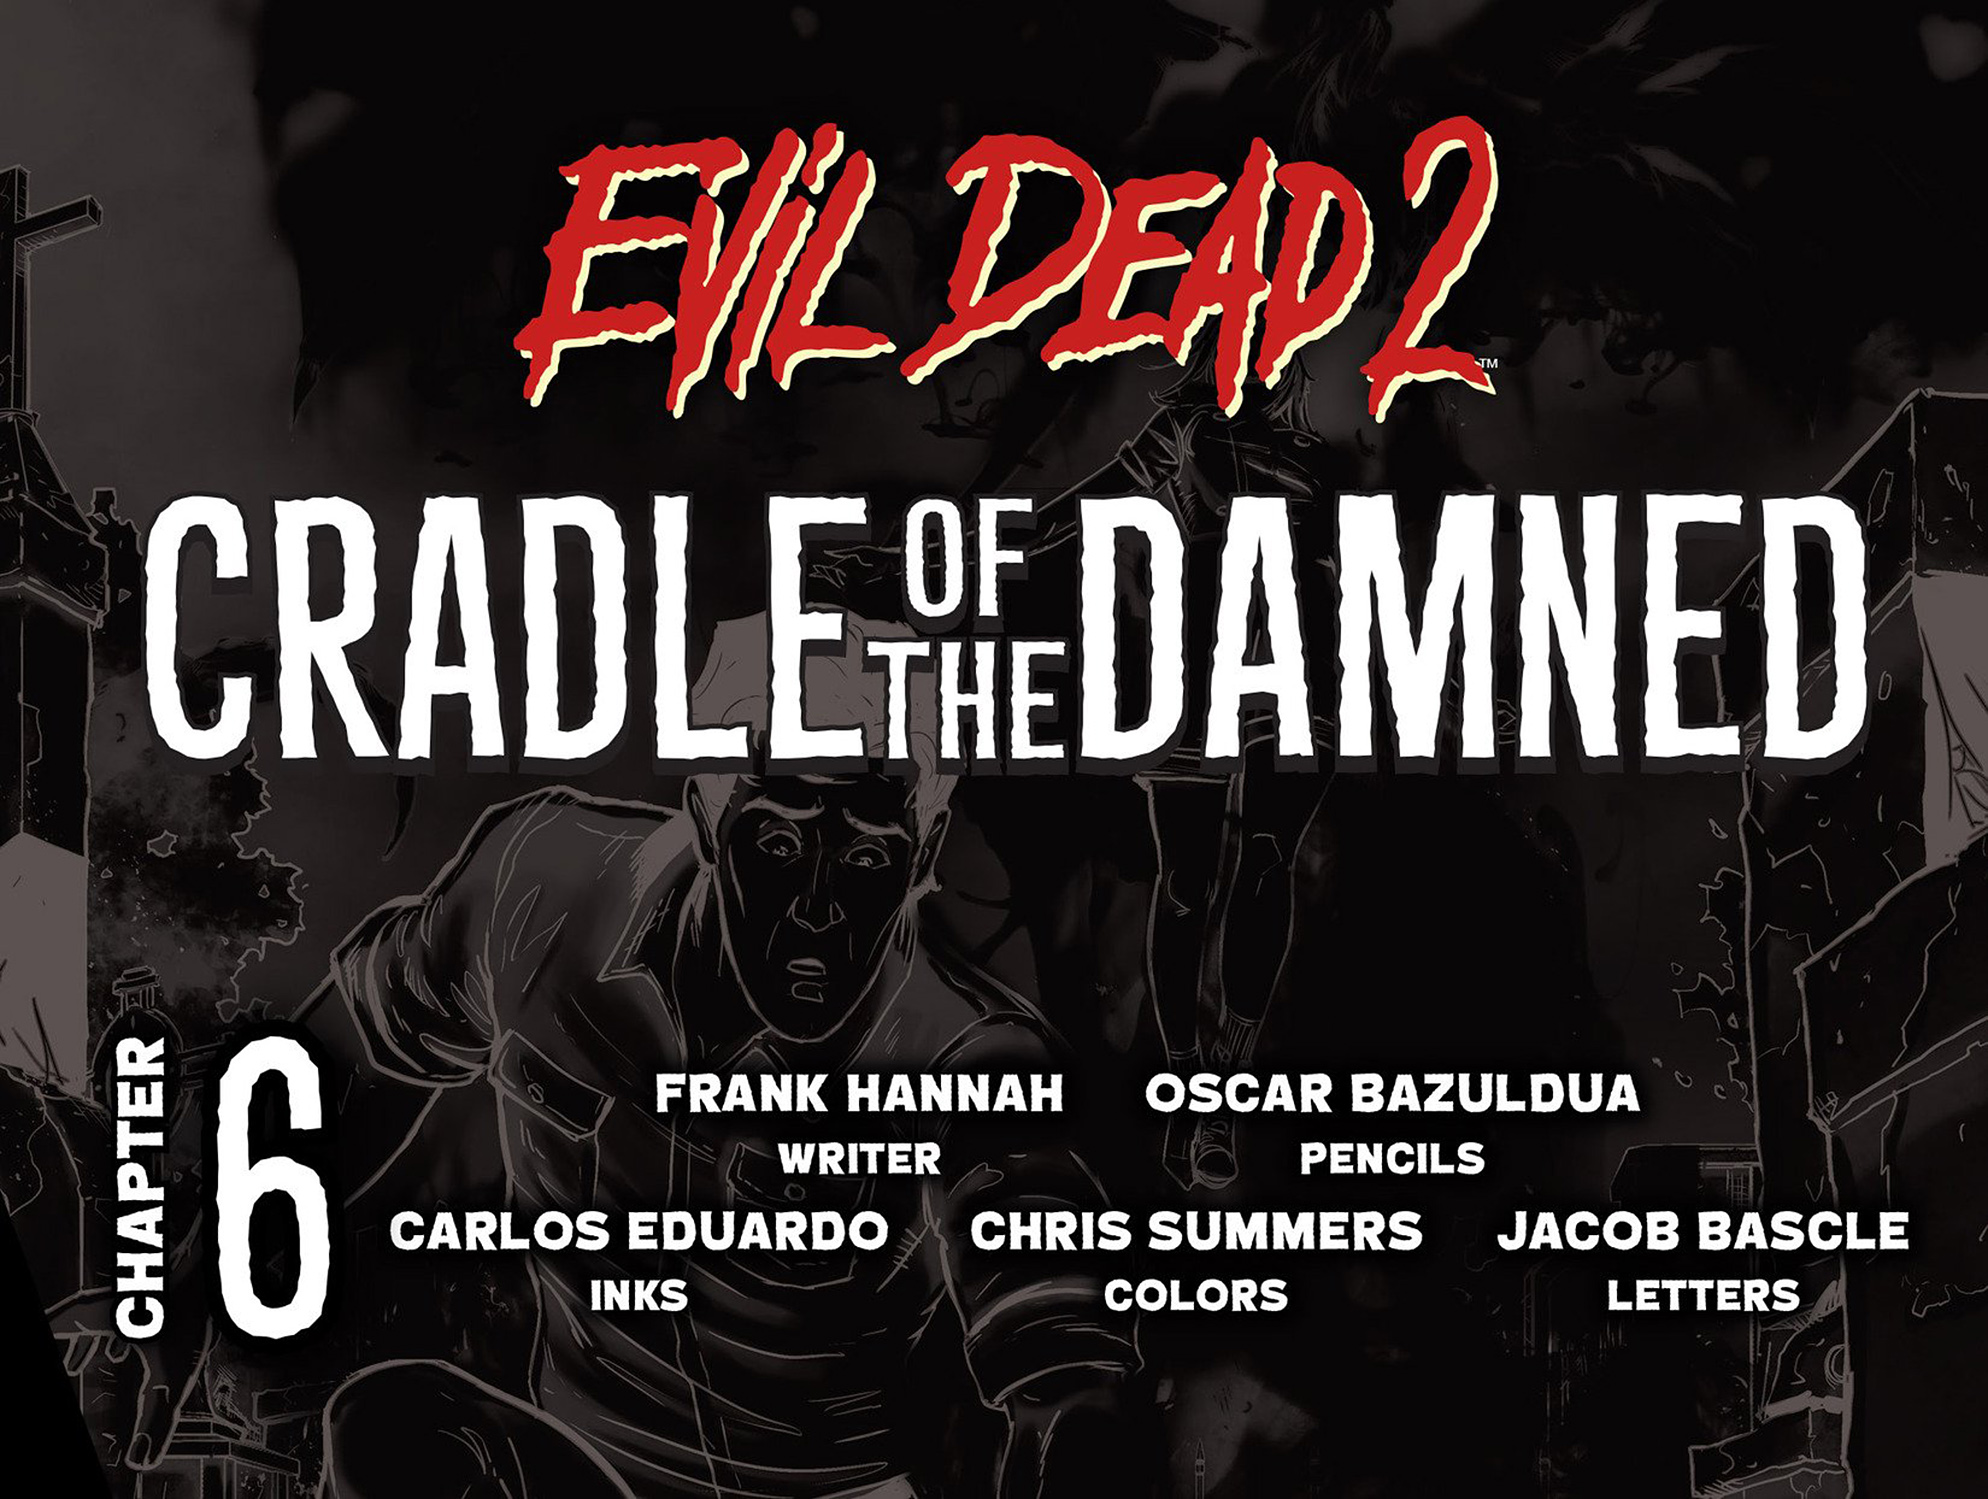 Read online Evil Dead 2: Cradle of the Damned comic -  Issue #6 - 2